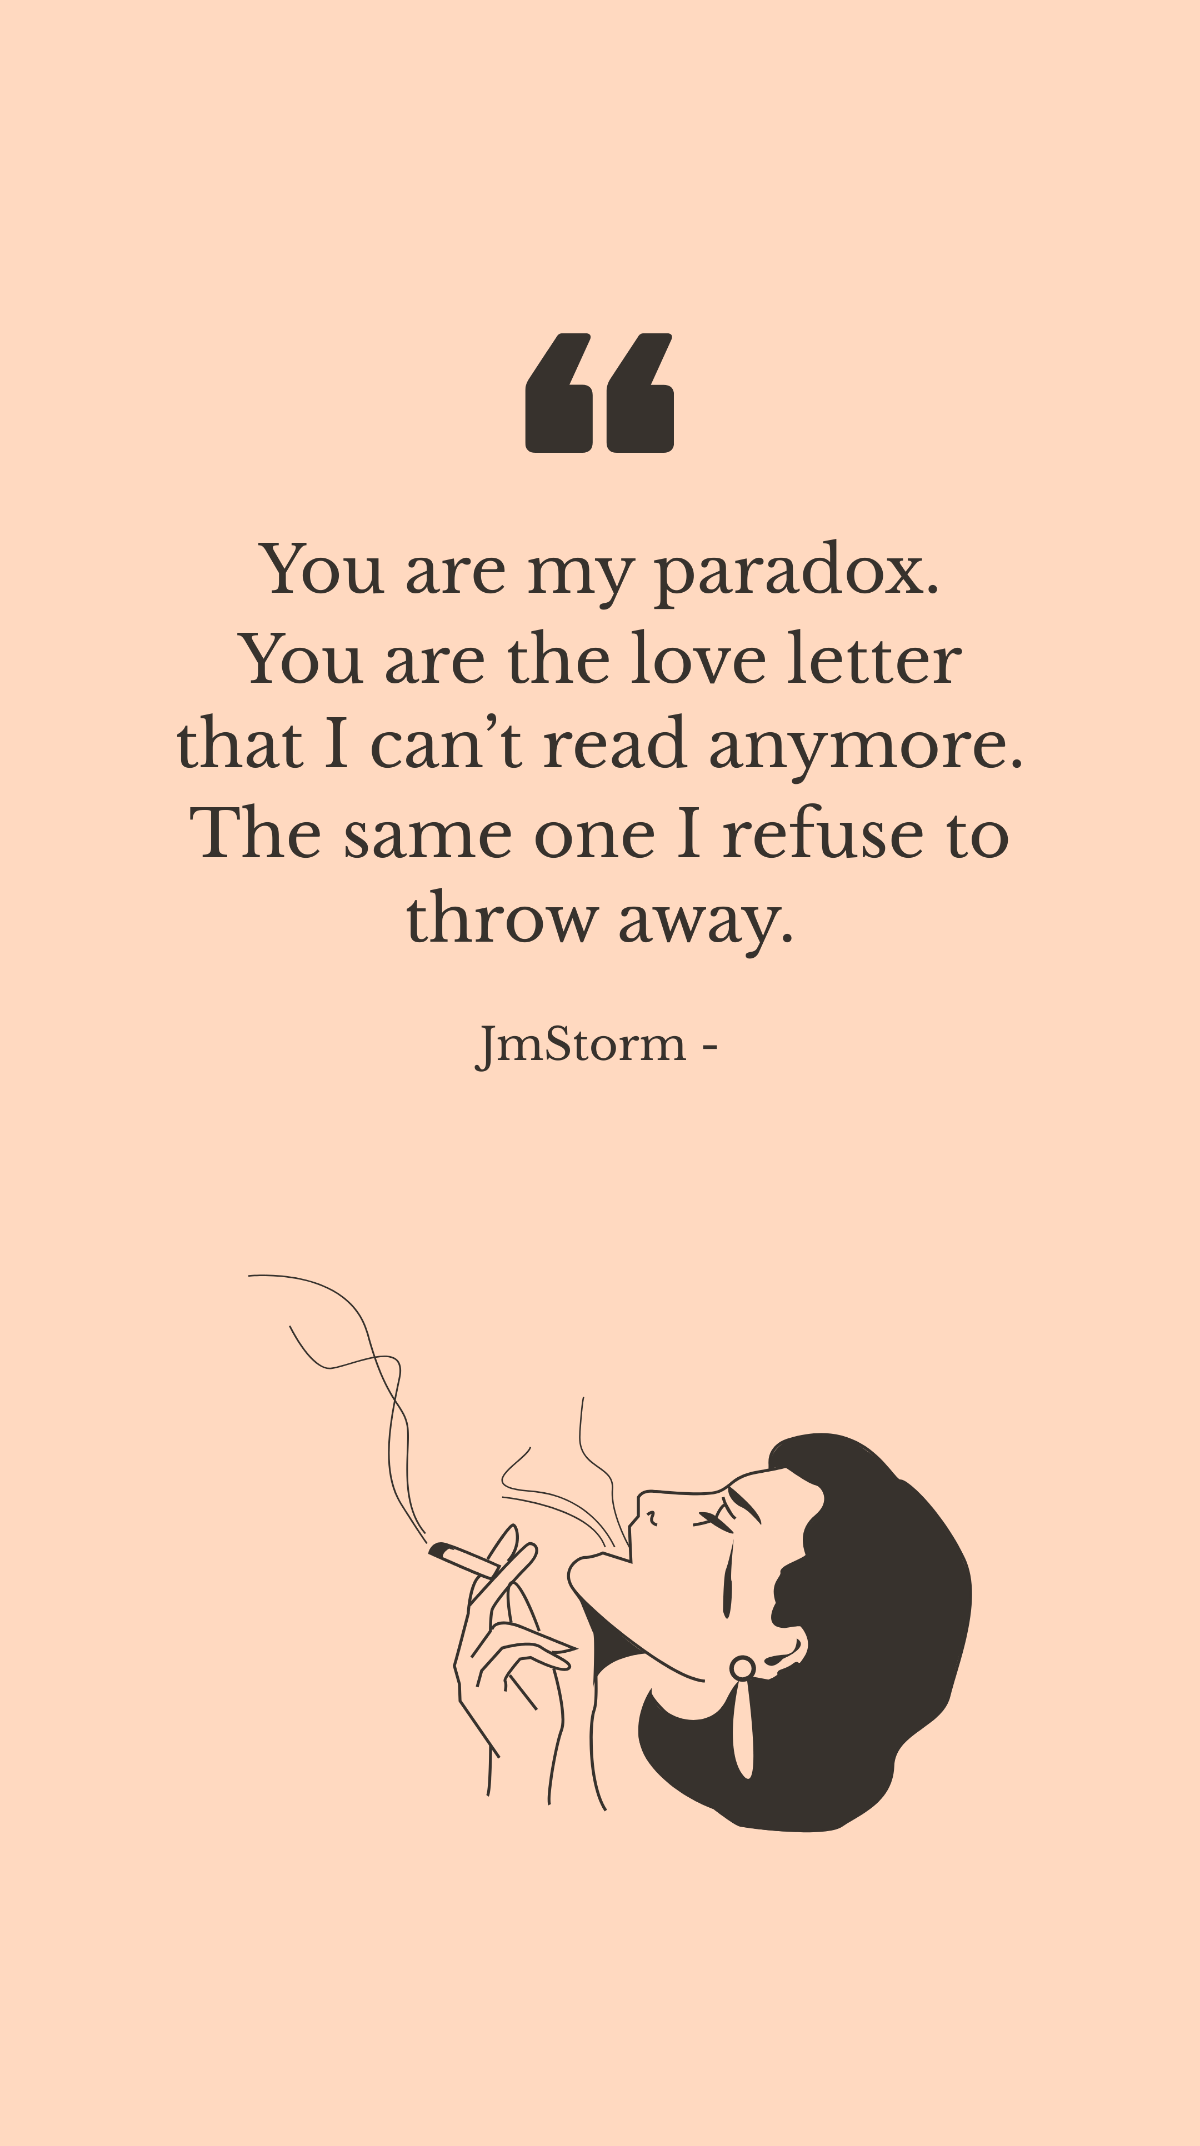 JmStorm - You are my paradox. You are the love letter that I can’t read anymore. The same one I refuse to throw away. Template